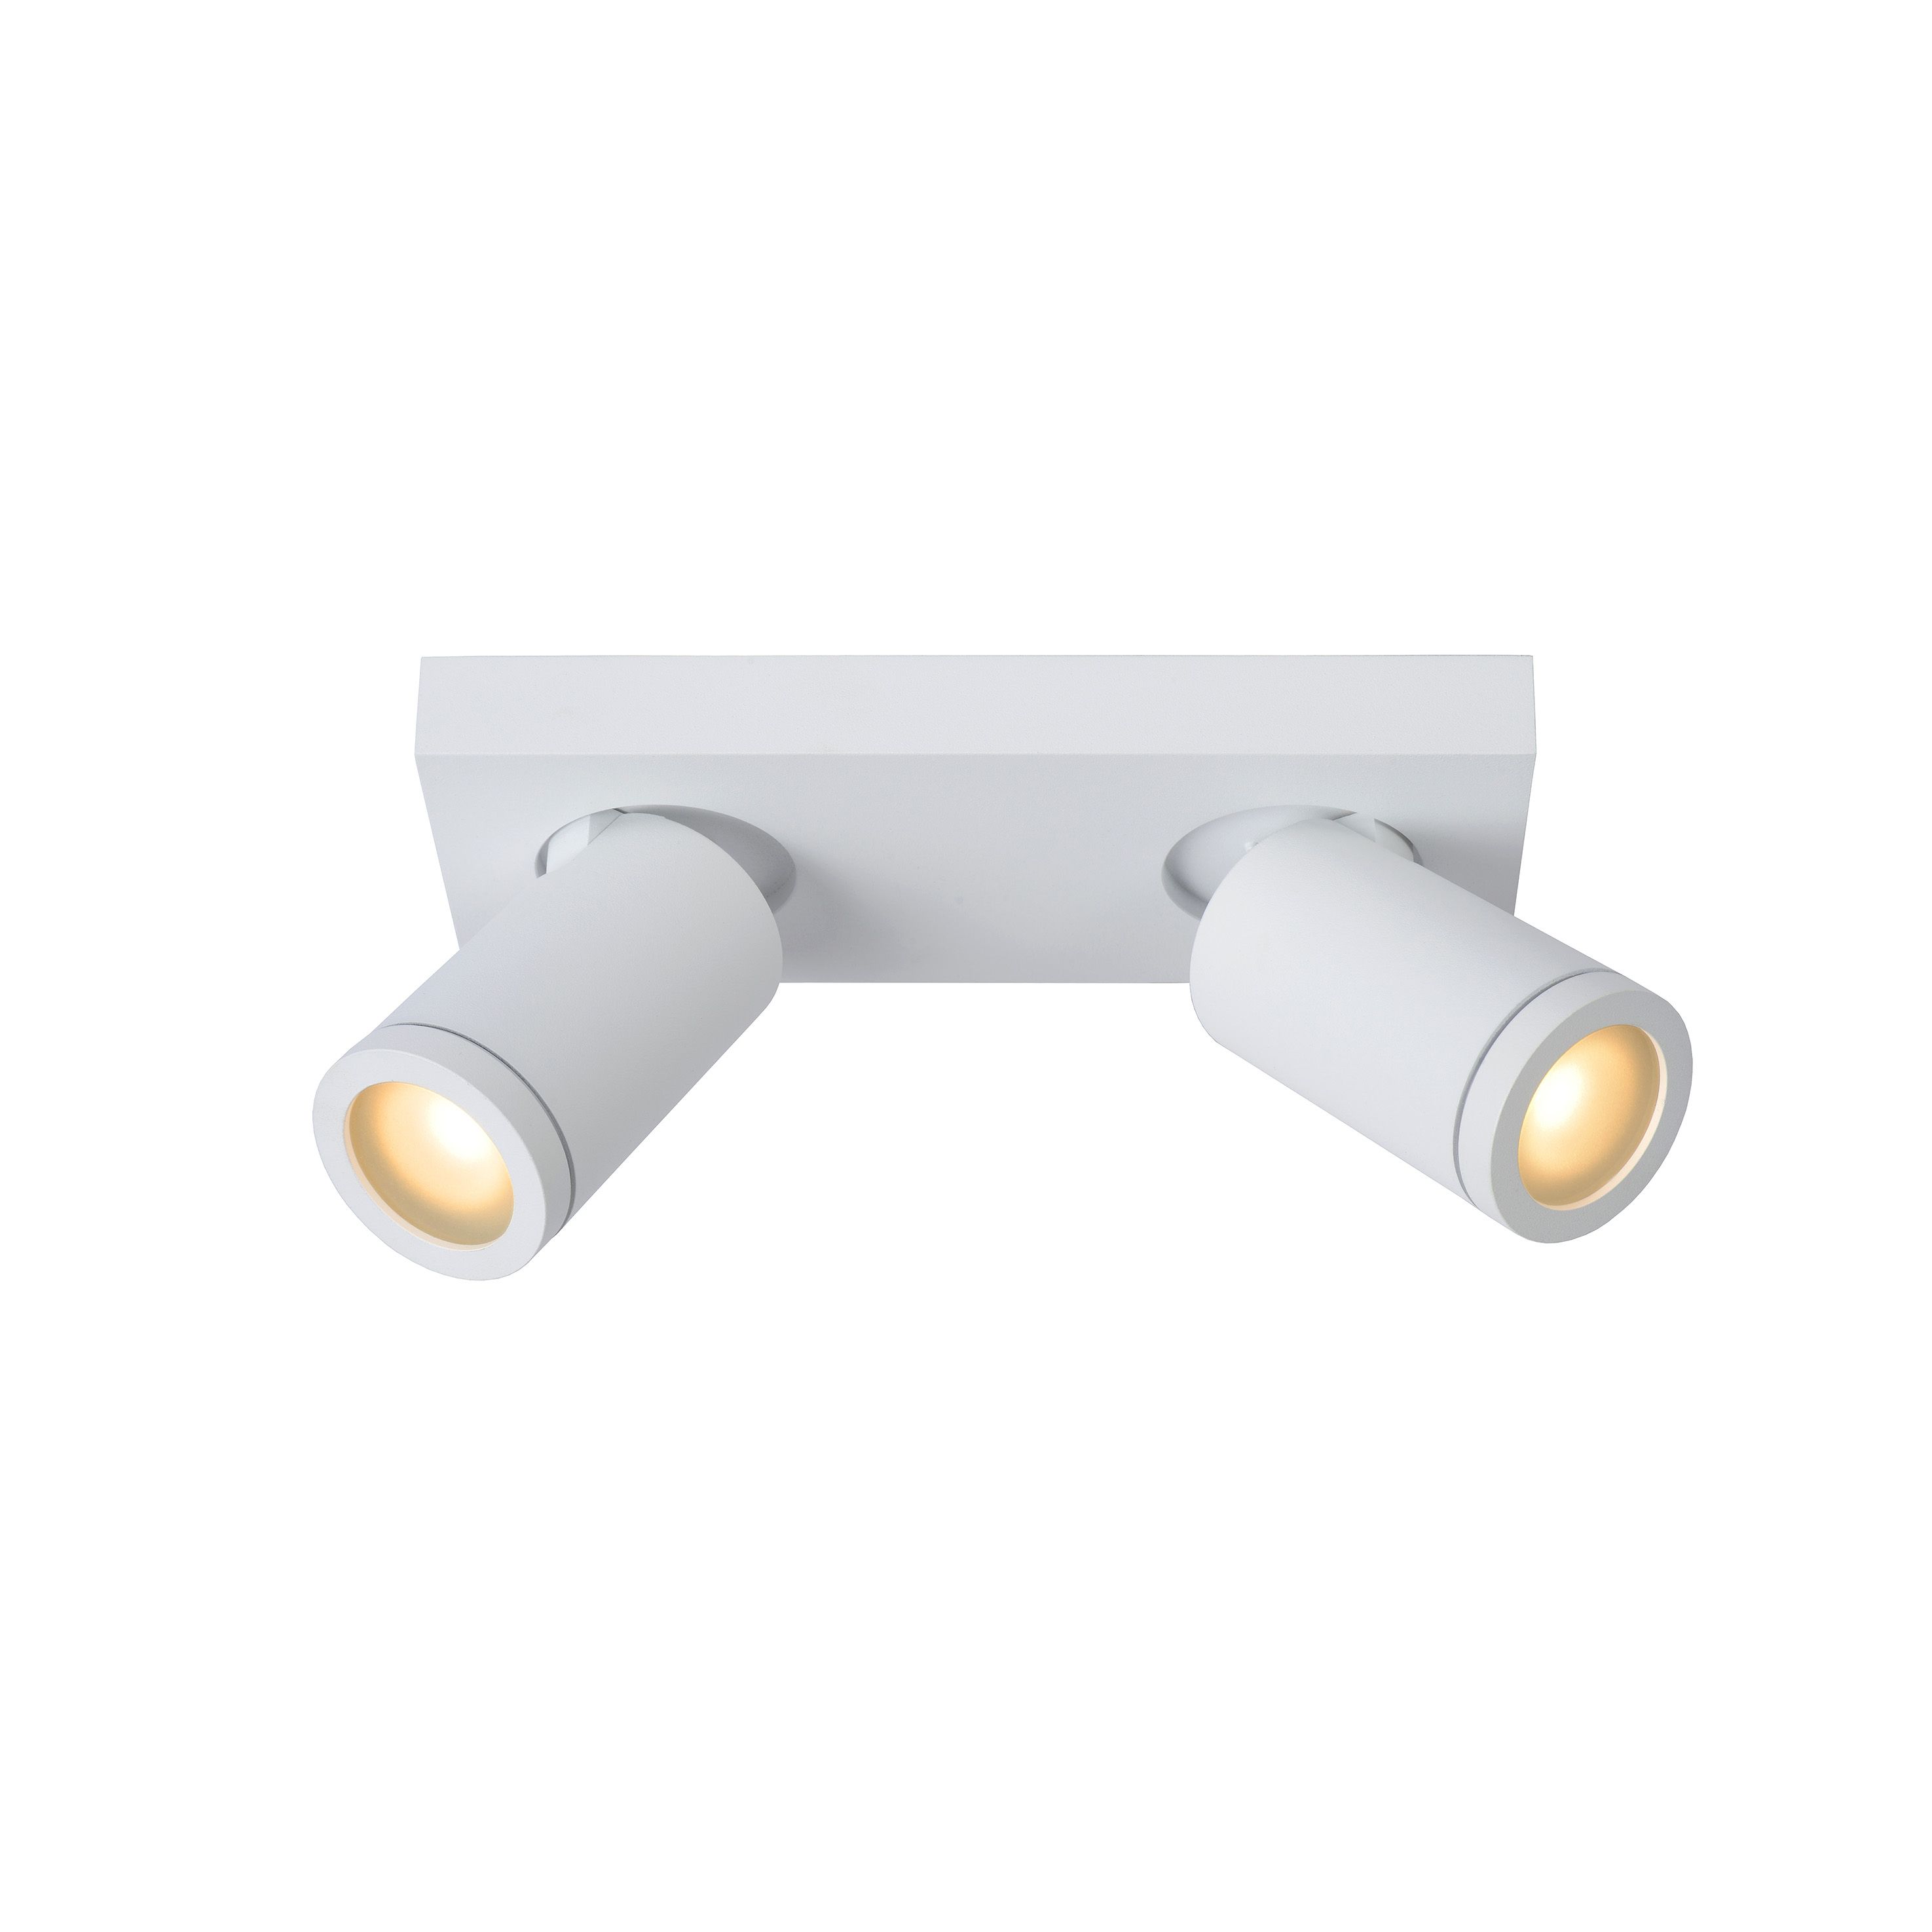 handig jas liefde Lucide Taylor - opbouwspot 2L - 24 x 10 x 12,5 cm - 2 x 5W dimbare LED  incl. - dim to warm - IP44 - wit | Lichtkoning